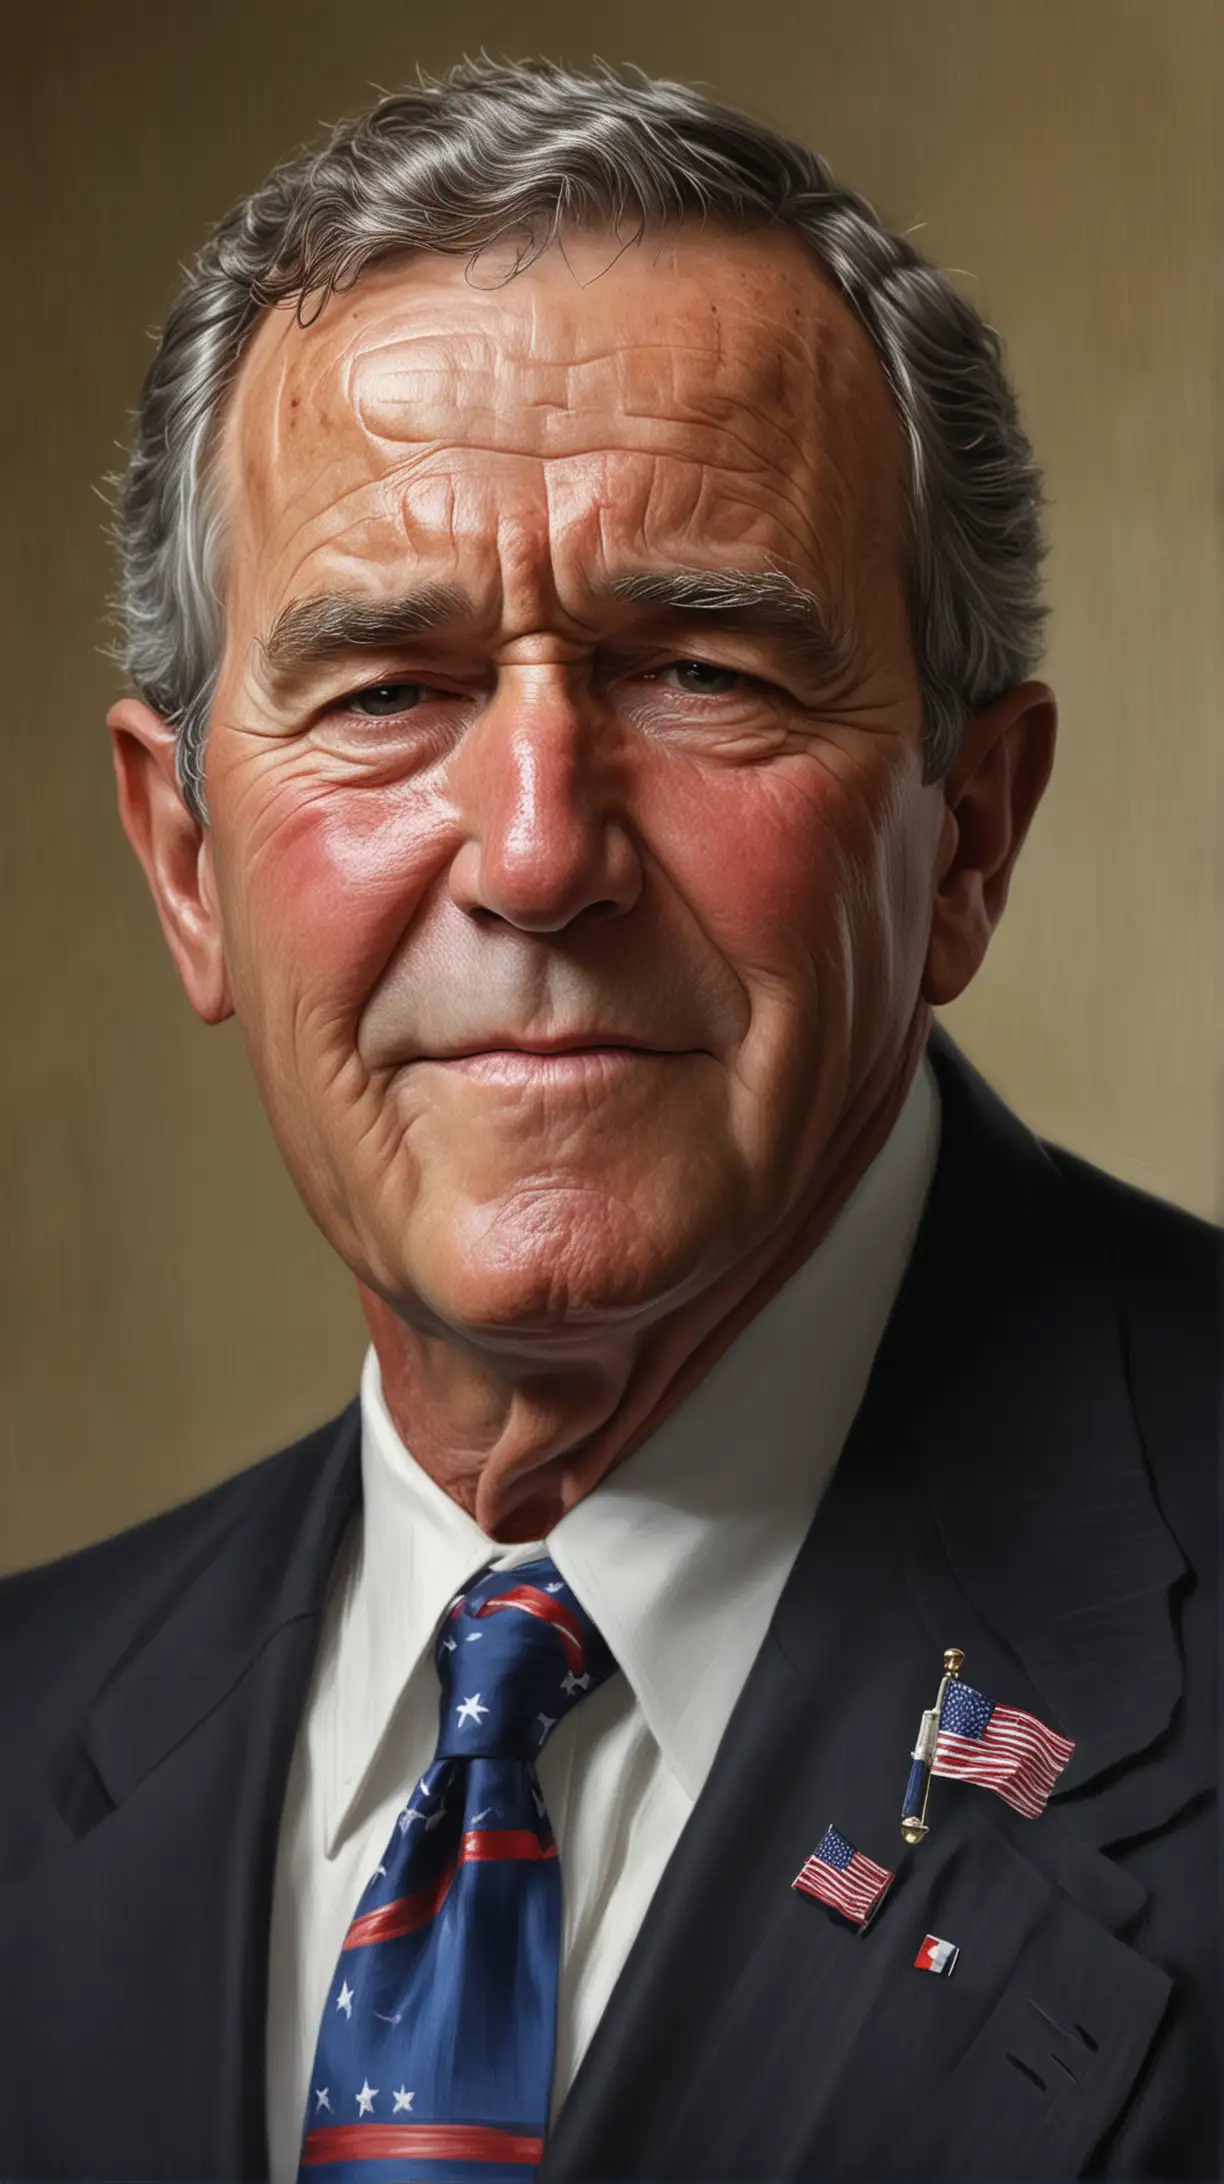 Dignified Portrait of George Bush in Formal Dark Suit with American Flag Pin